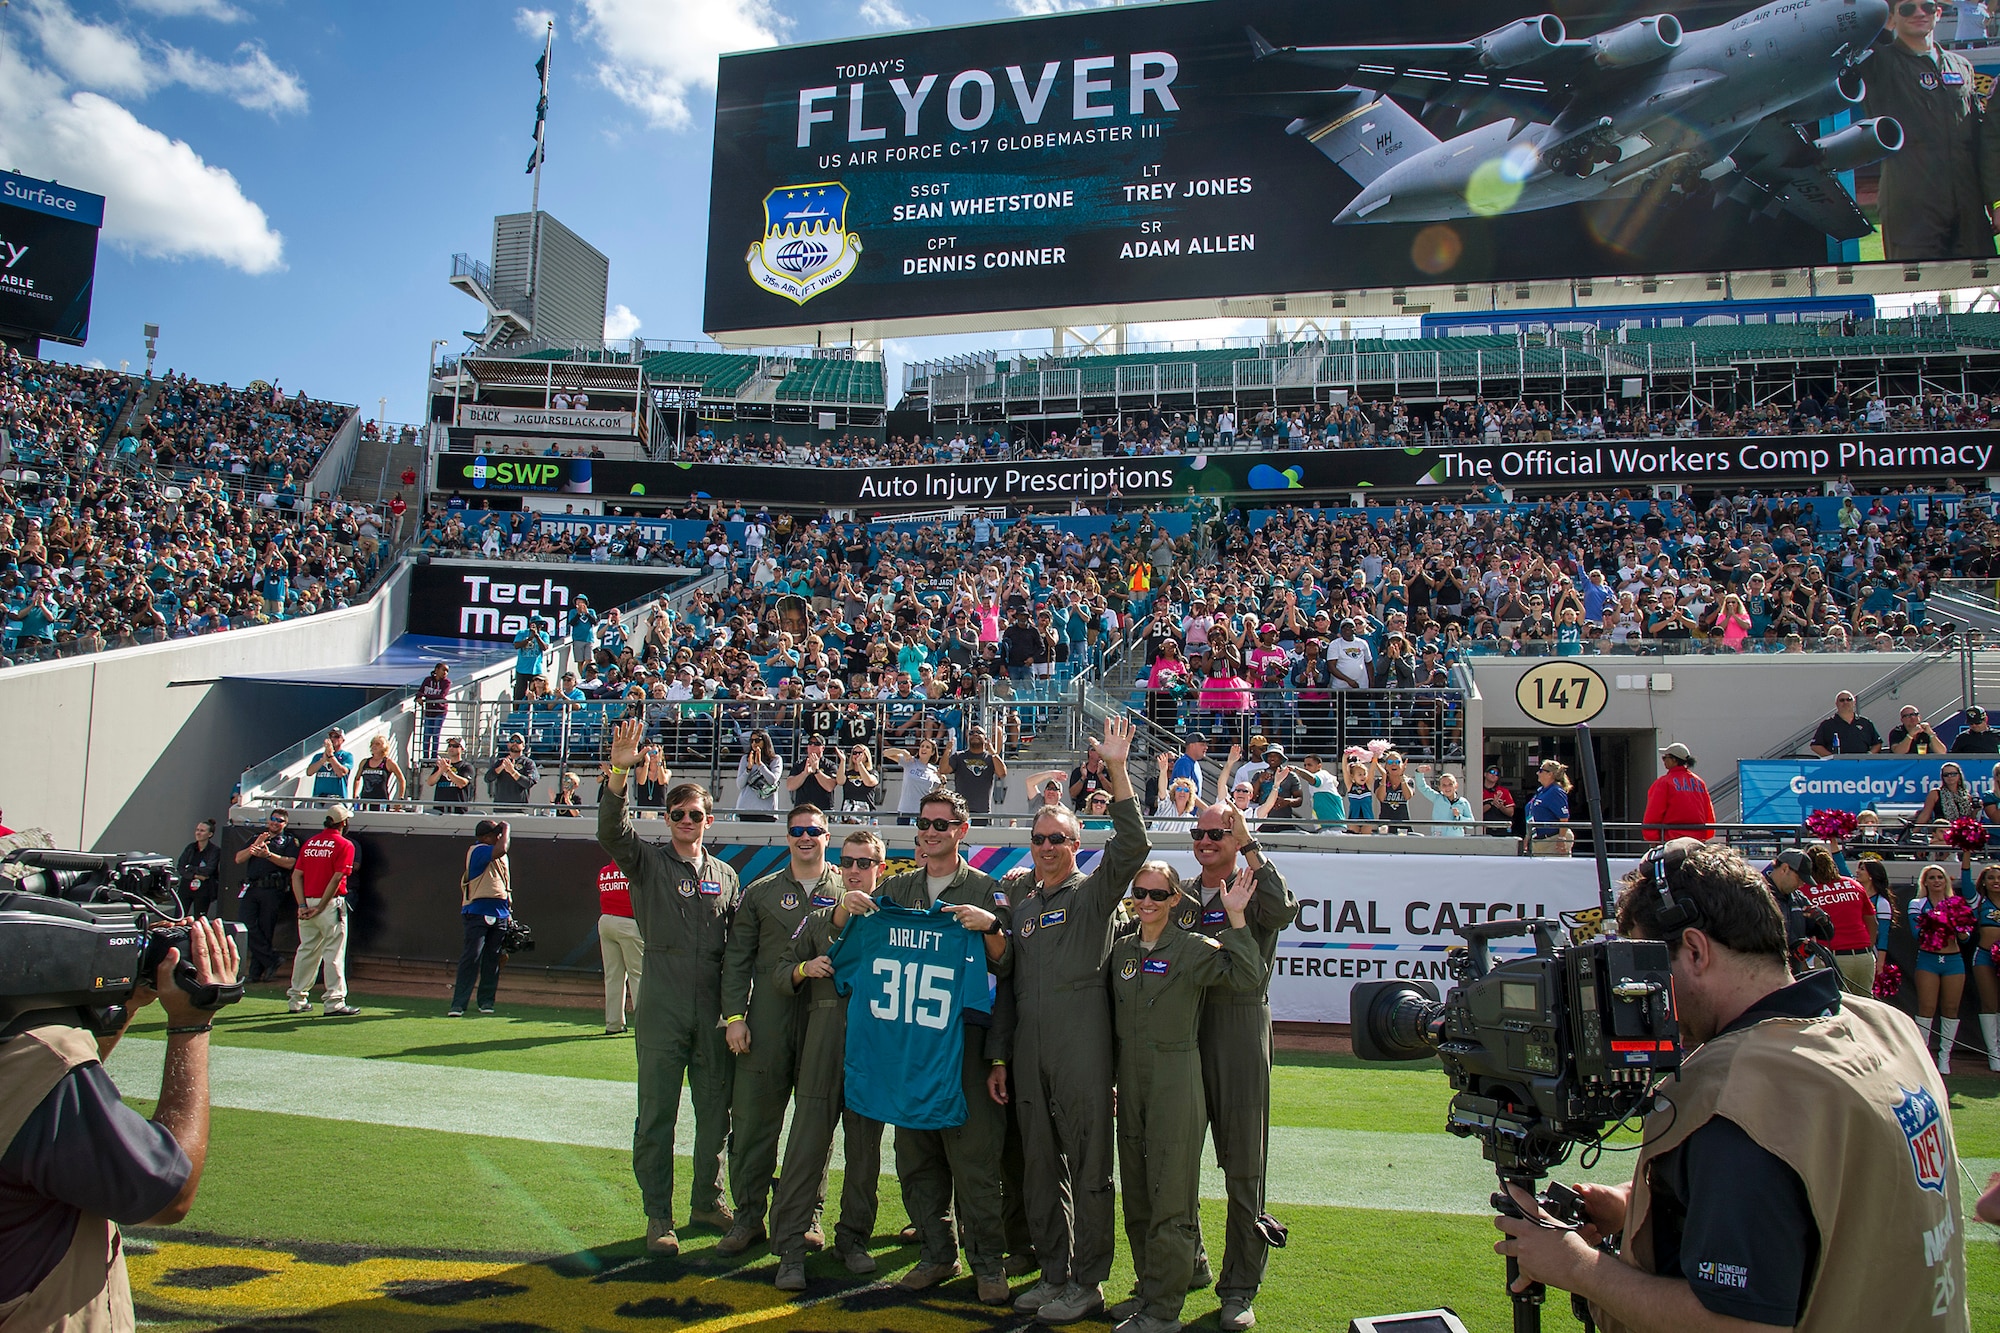 While the Jacksonville Jaguars lost their Oct. 21 home game against the Houston Texans, 20-7, the game at least started off with a thunderous roar from a Charleston C-17 Globemaster III flown a mere 1,500 feet above by the 701st Airlift Squadron aka the “Turtles.”